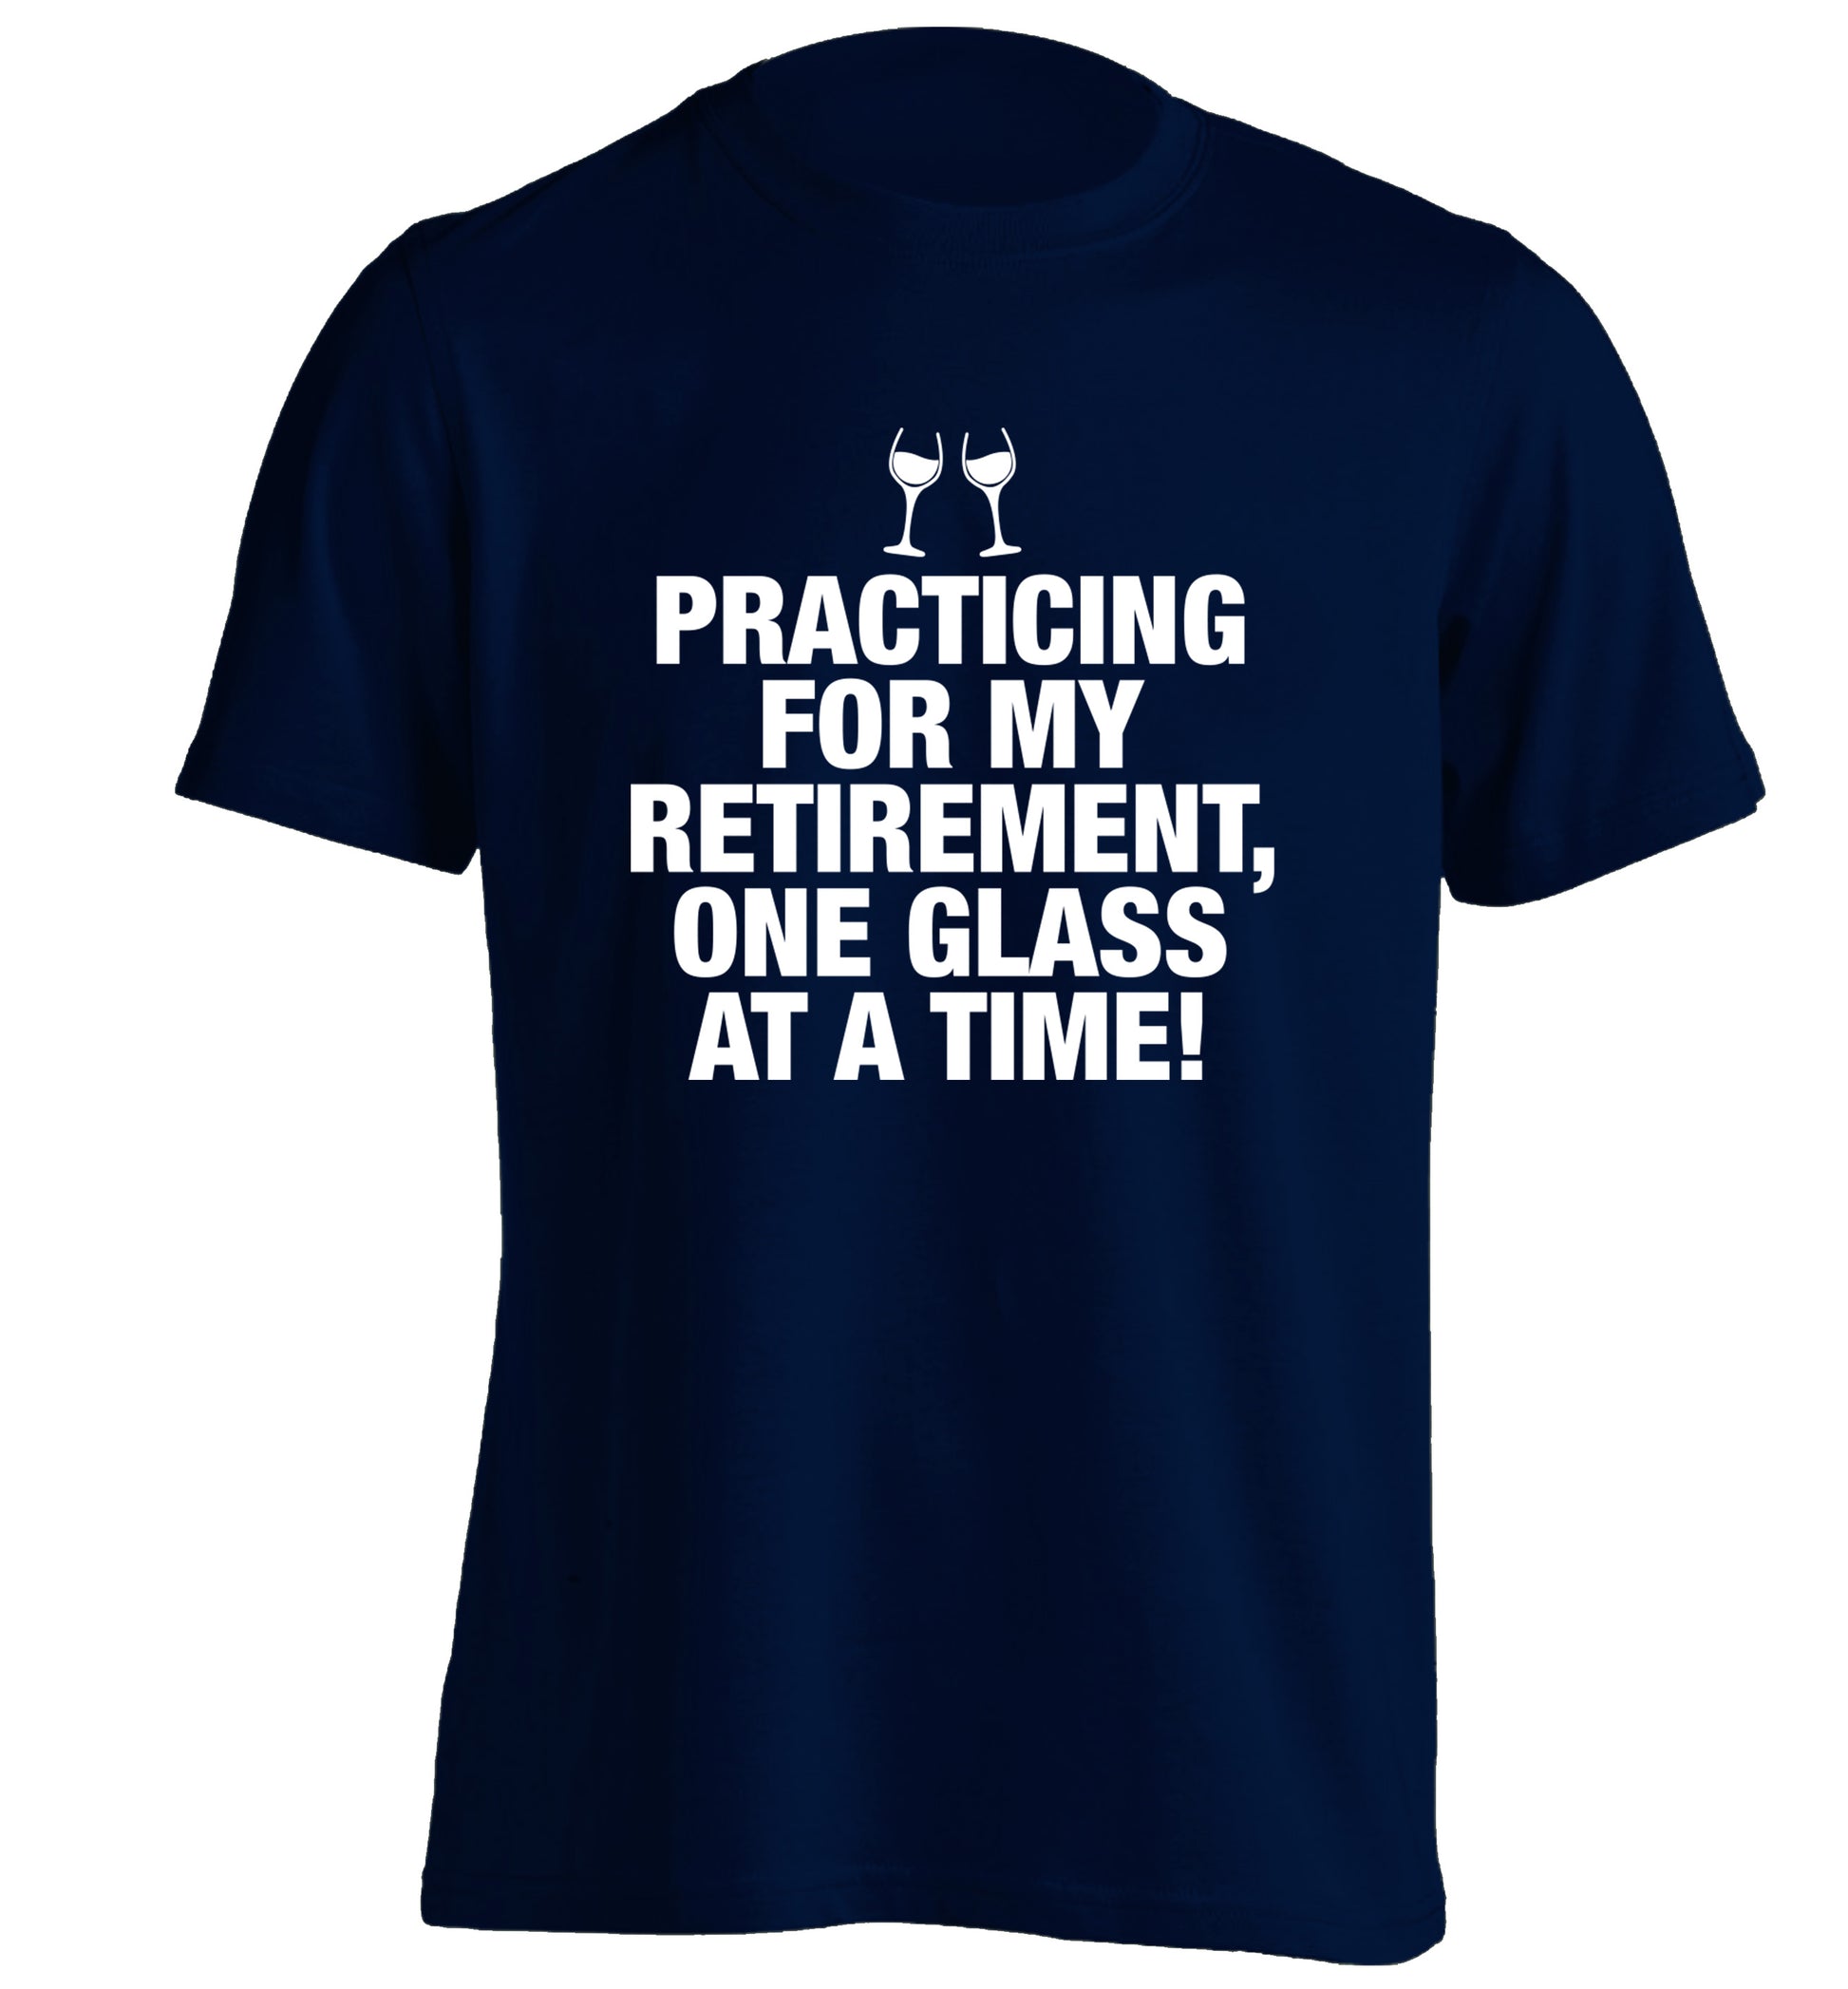 Practicing my retirement one glass at a time adults unisex navy Tshirt 2XL